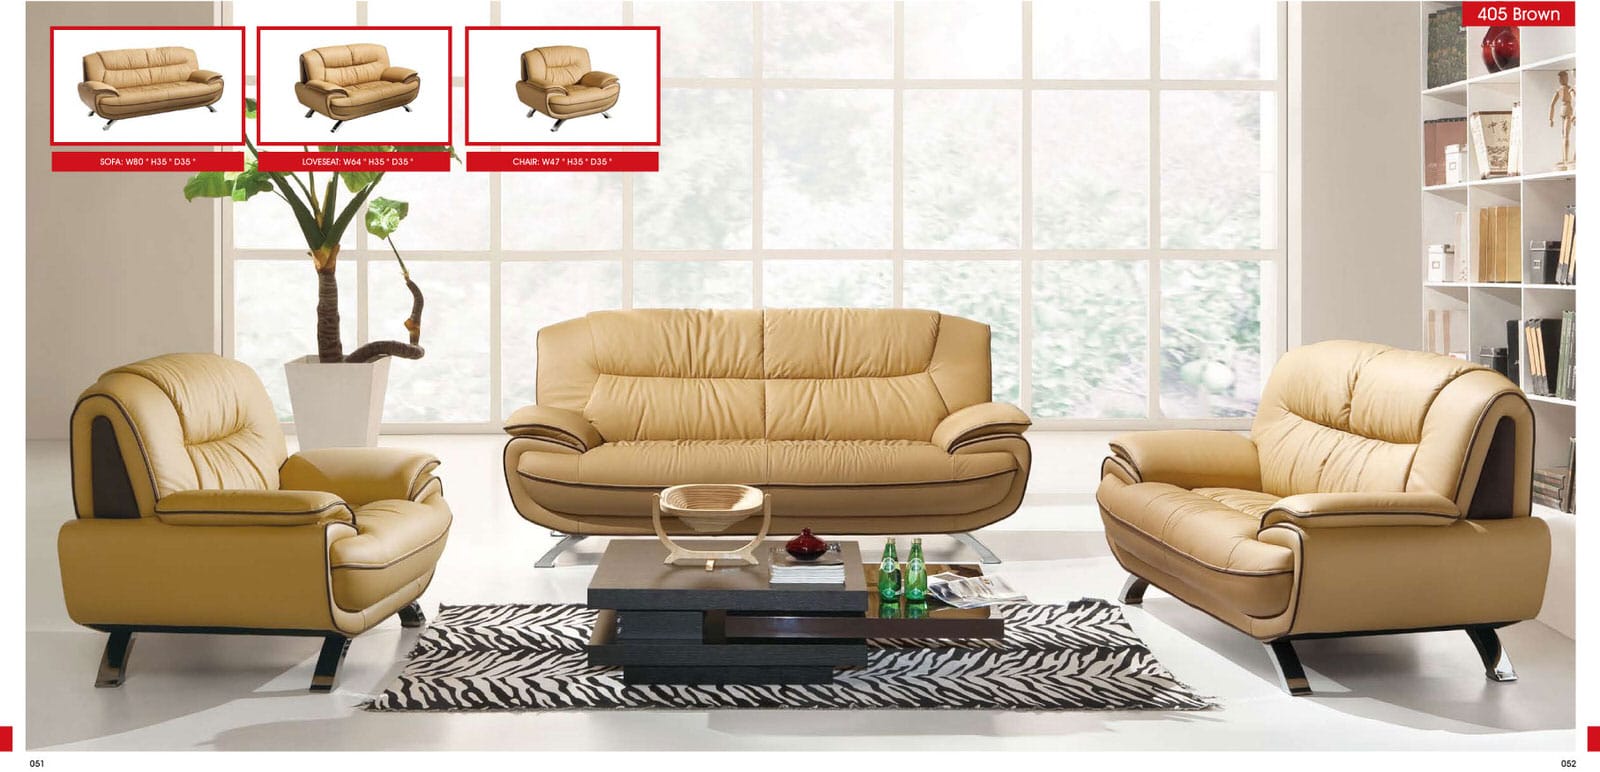 405 Brown Leather Sofa Set by ESF